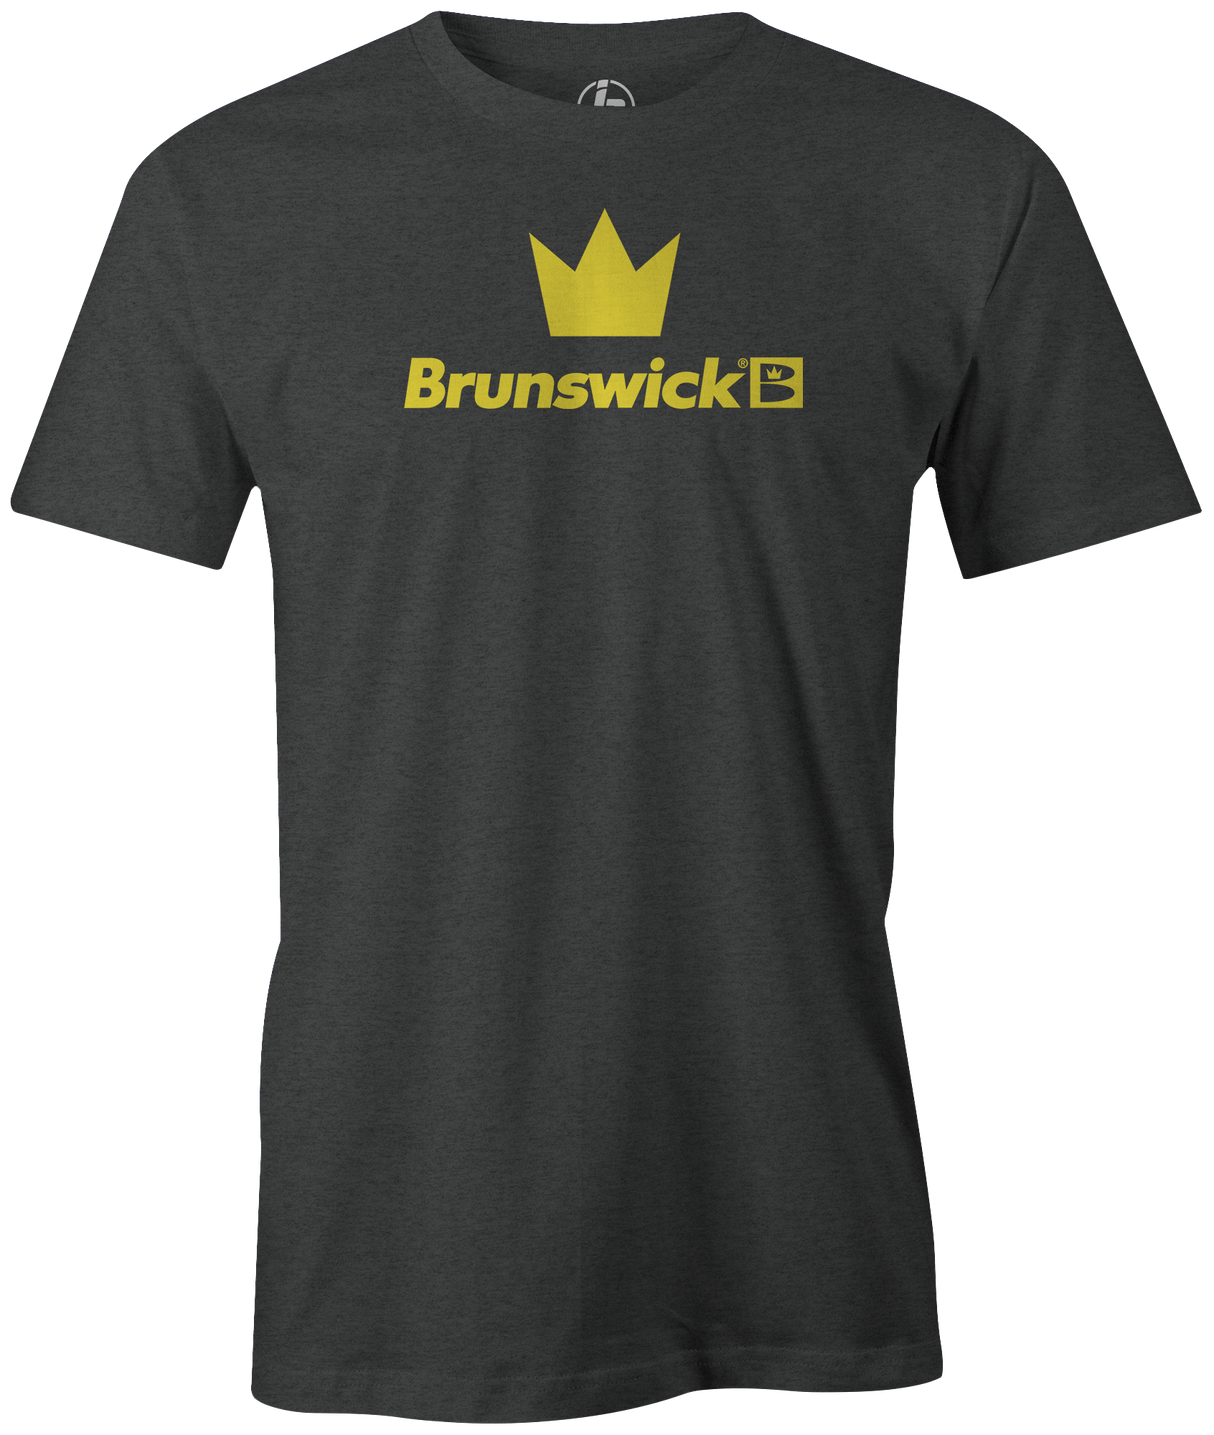 Over the years the Brunswick brand has delivered so much to bowlers all over the world. Their experience has led to many amazing products. Pick up the Brunswick Bowling Experience Crown Tee today. Retro Brunswick bowling league shirts on sale discounted gifts for bowlers. Bowling party apparel. Original bowling tees. throwback